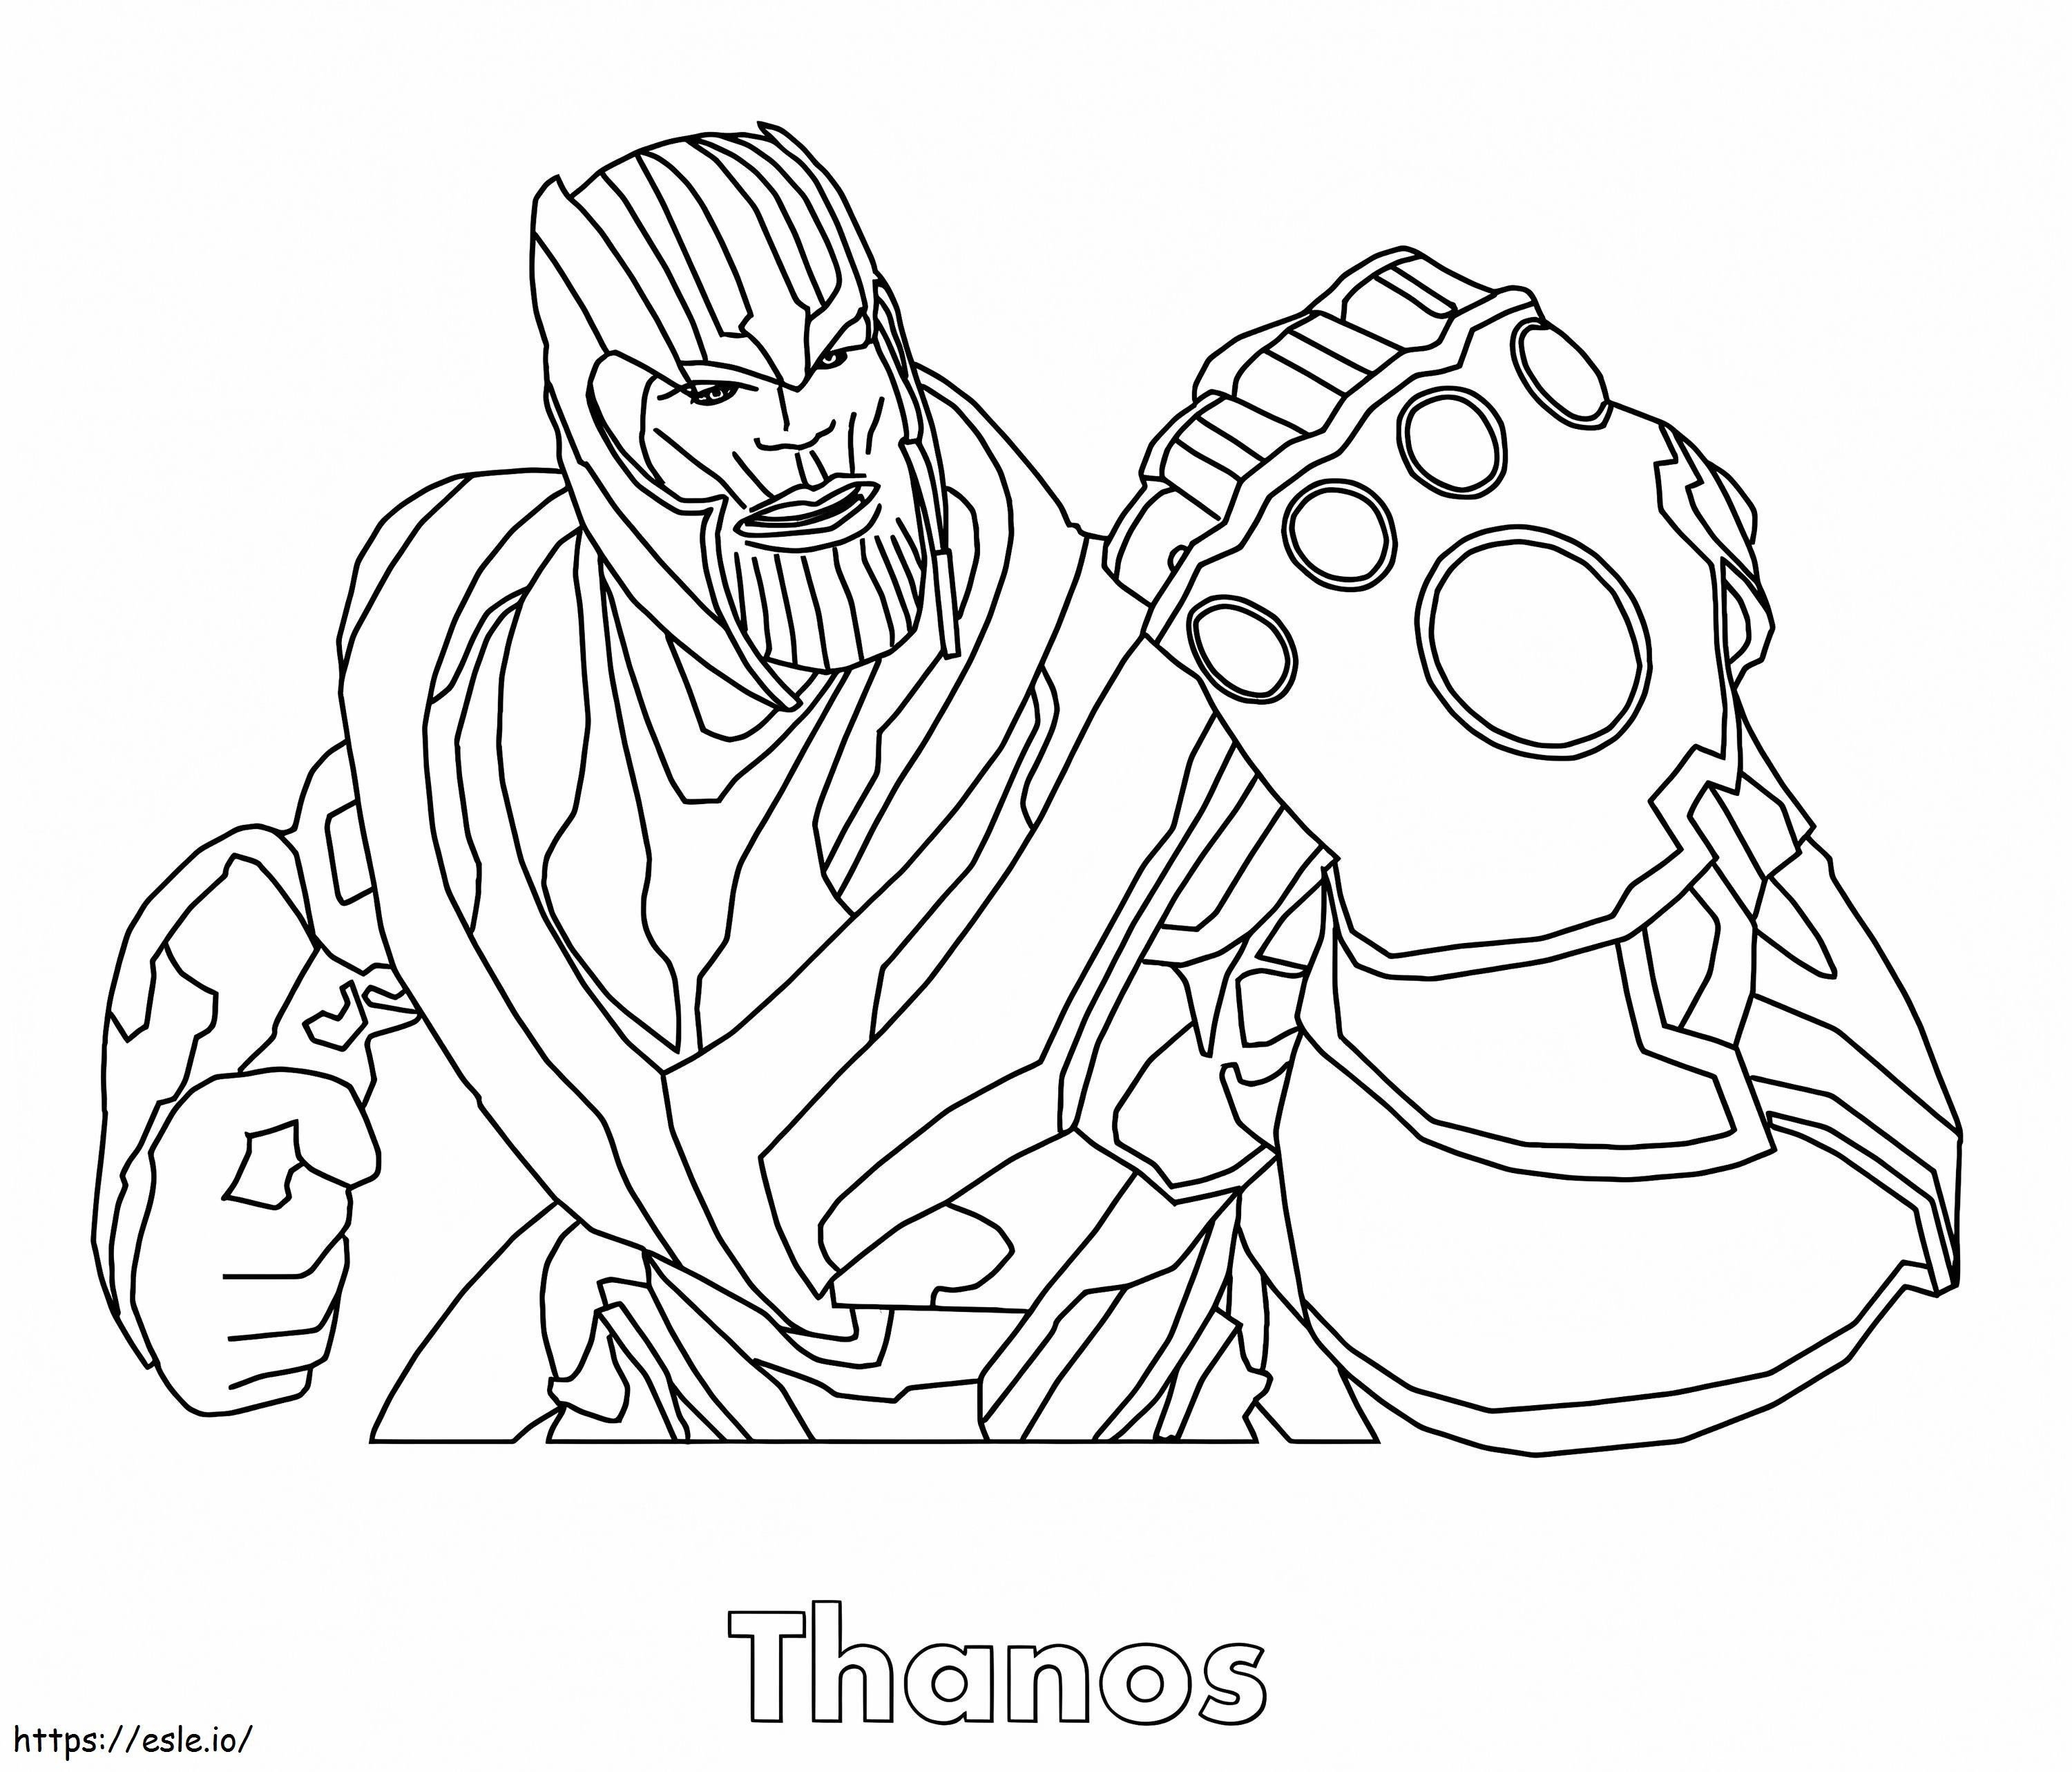 HQ Thanos Image coloring page